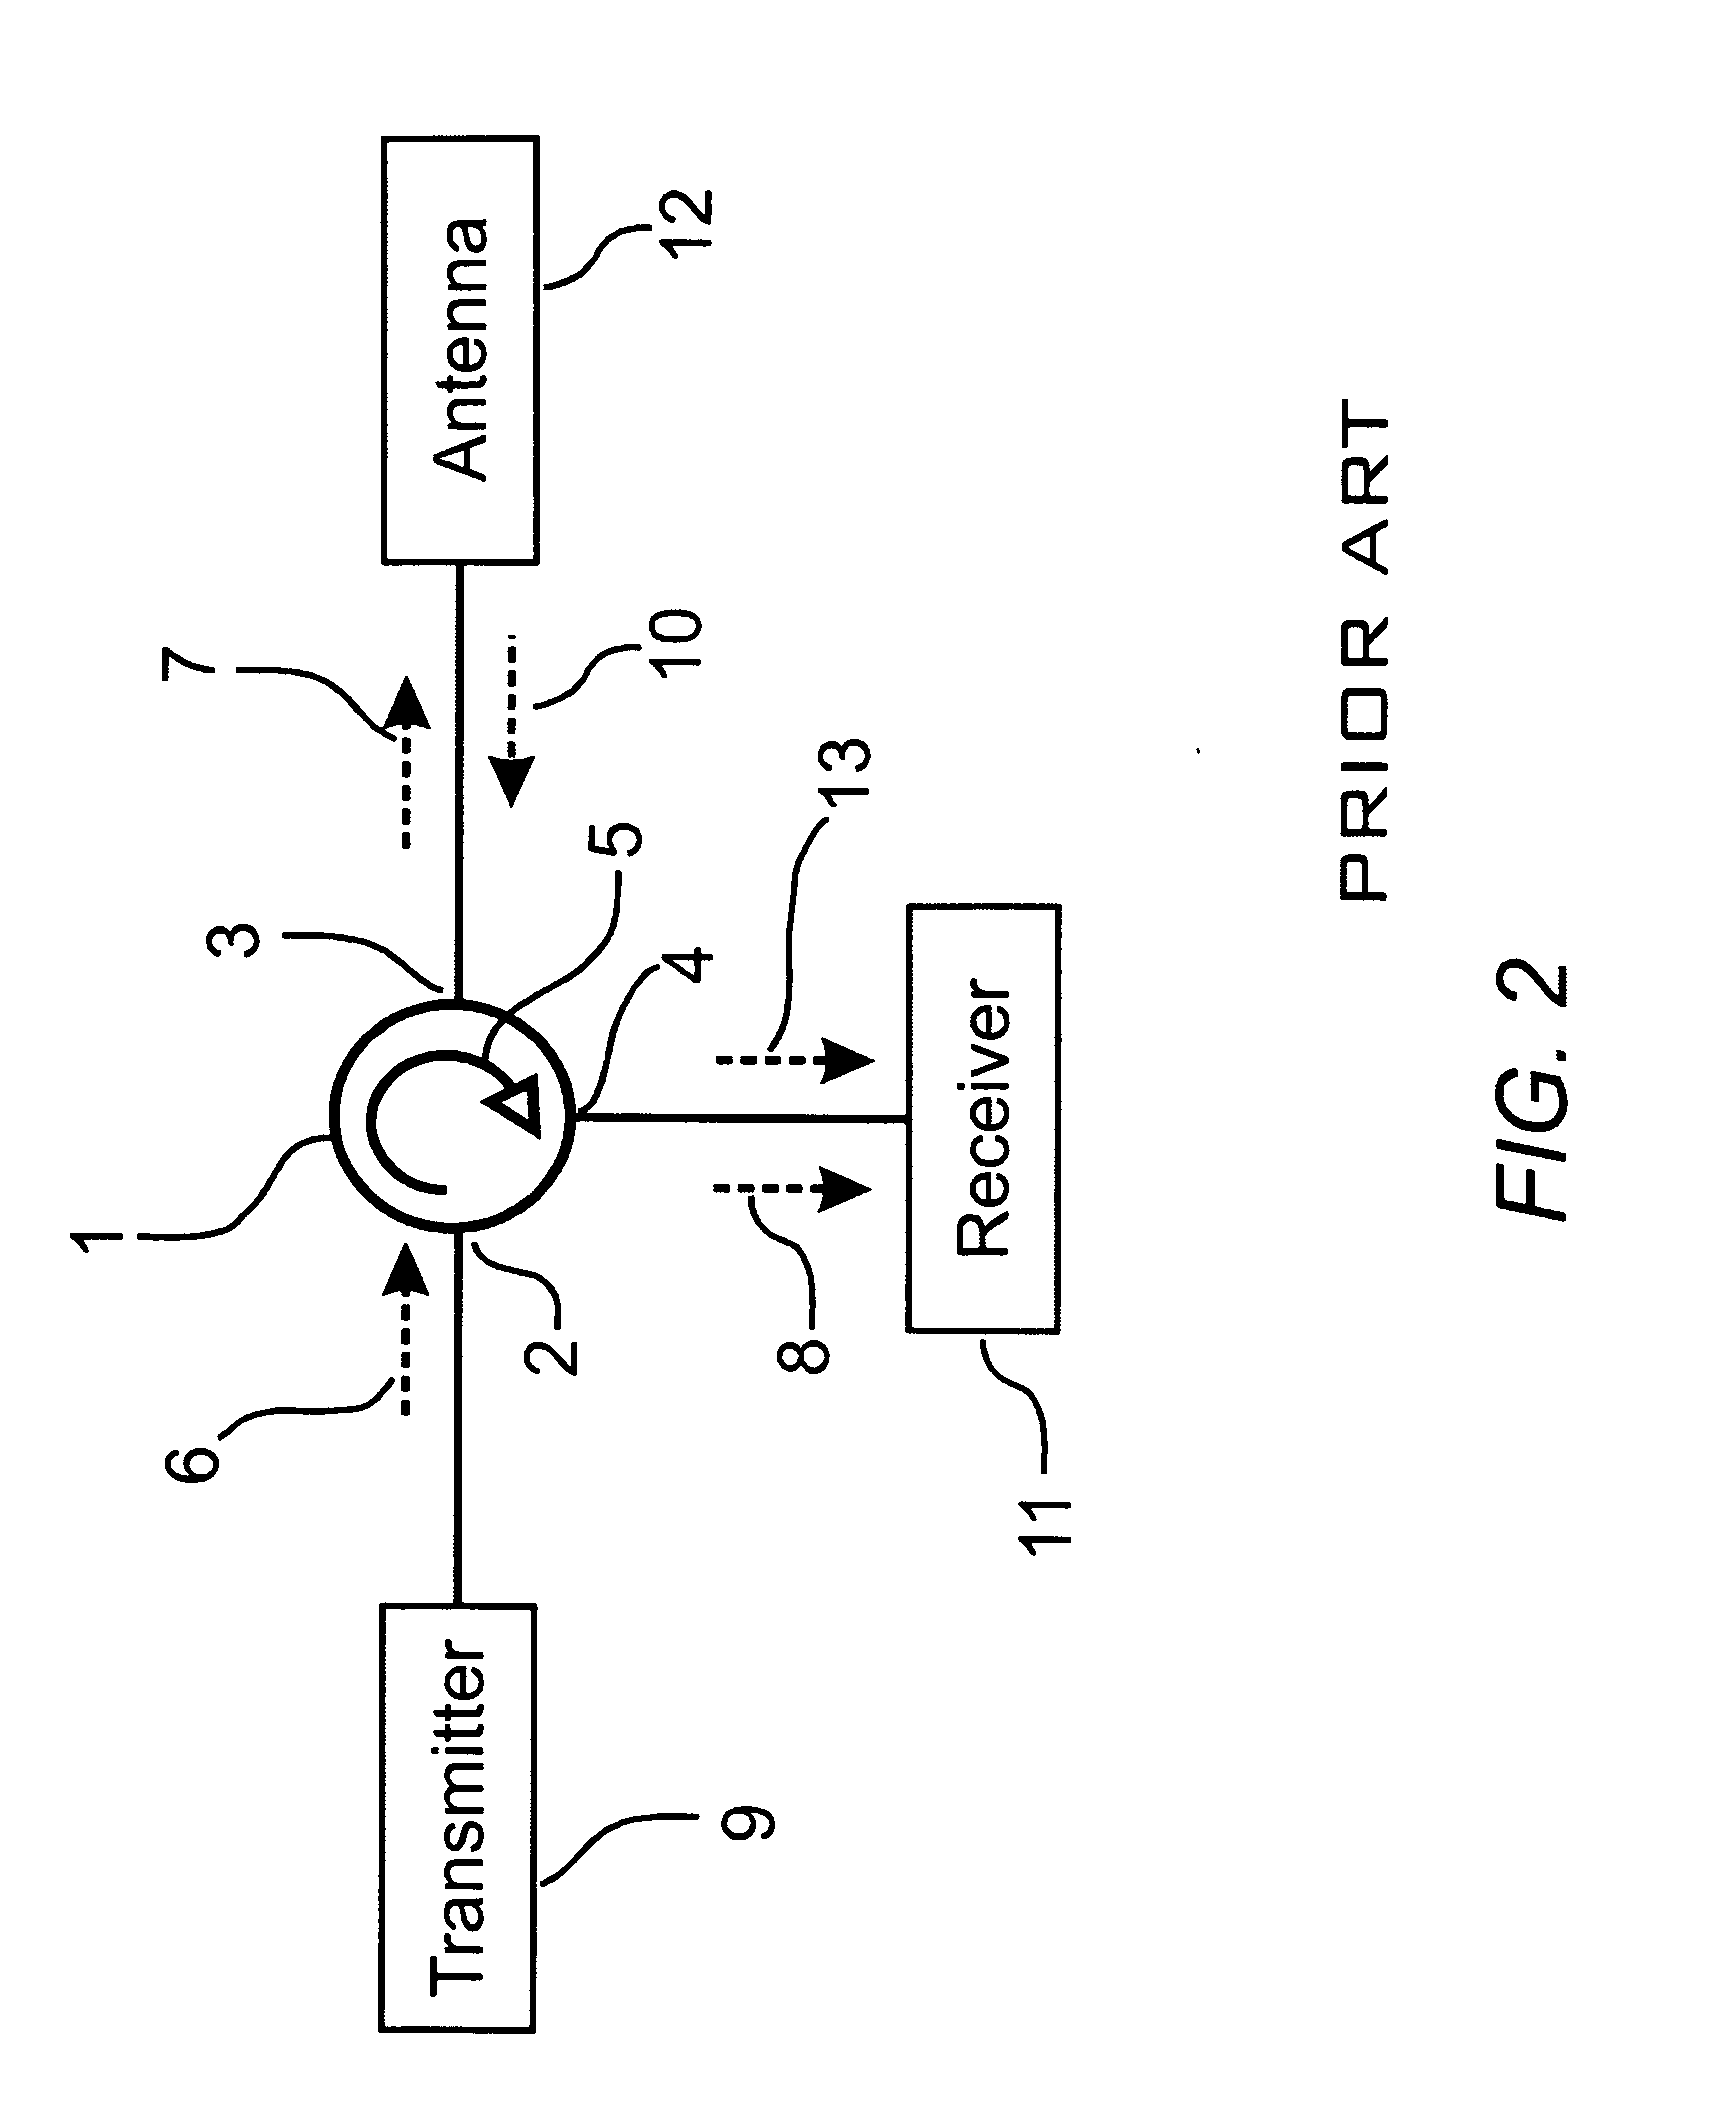 High isolation signal routing assembly for full duplex communication